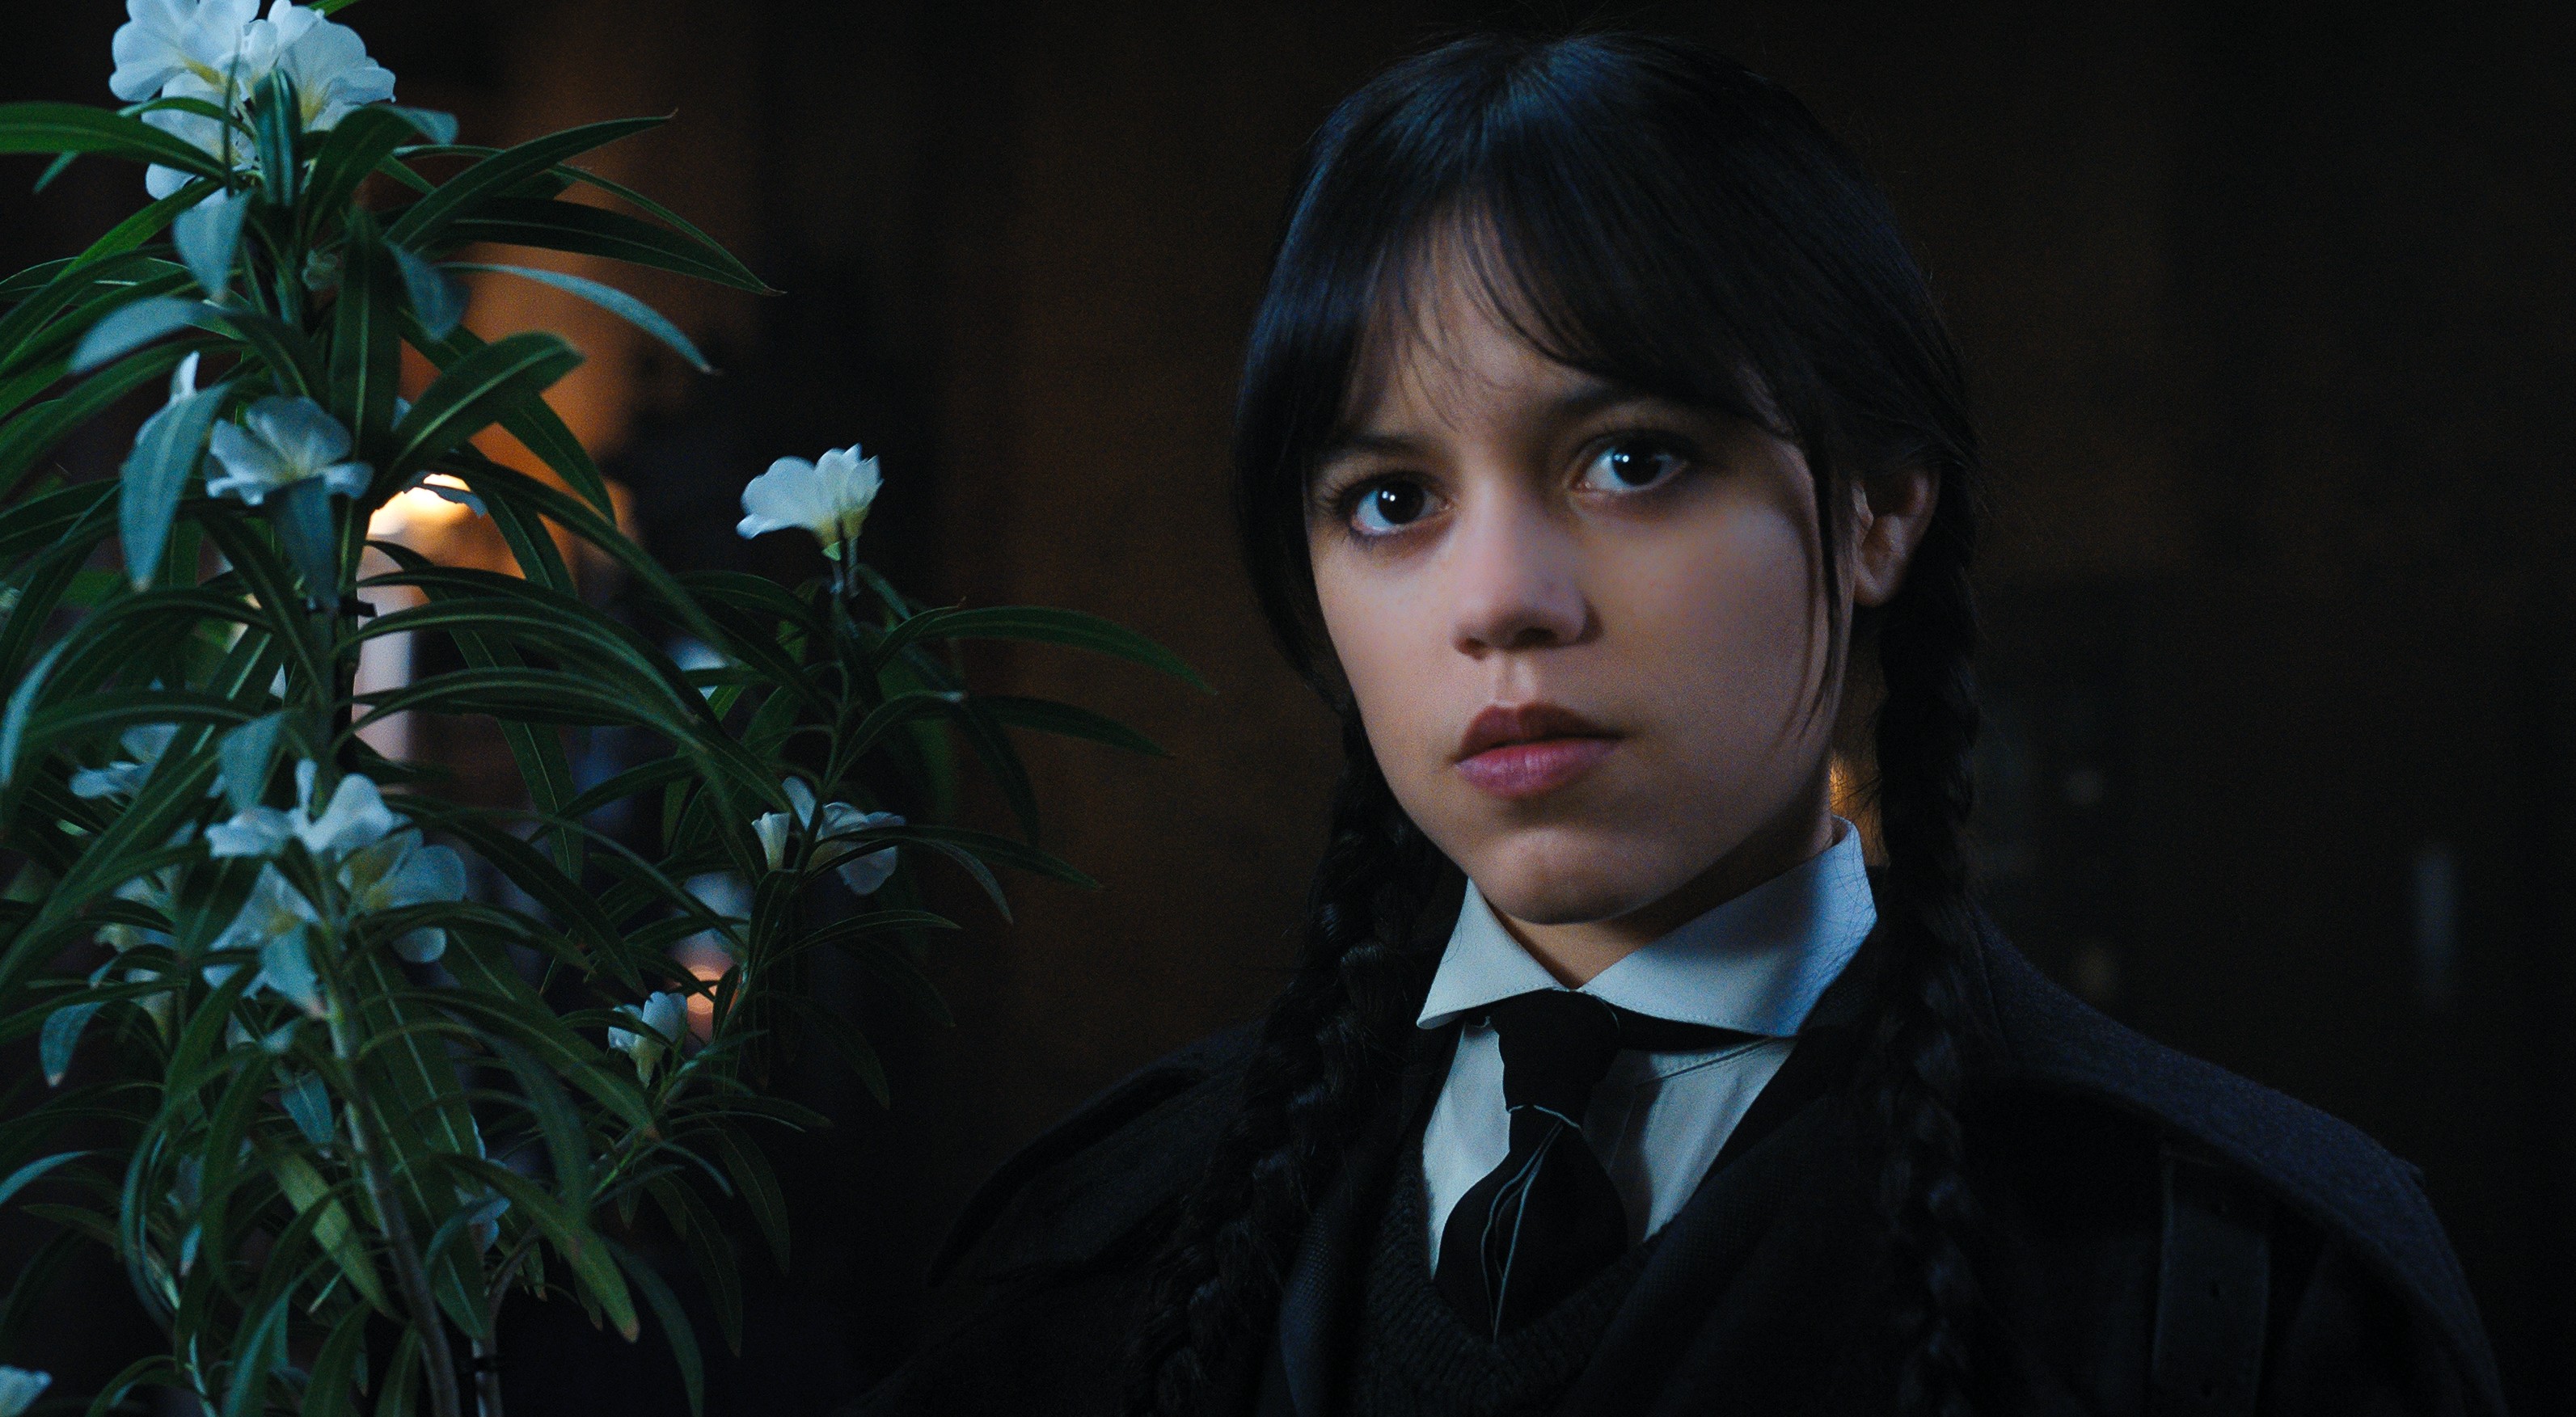 What Jenna Ortega Wanted to Do Differently for Wednesday